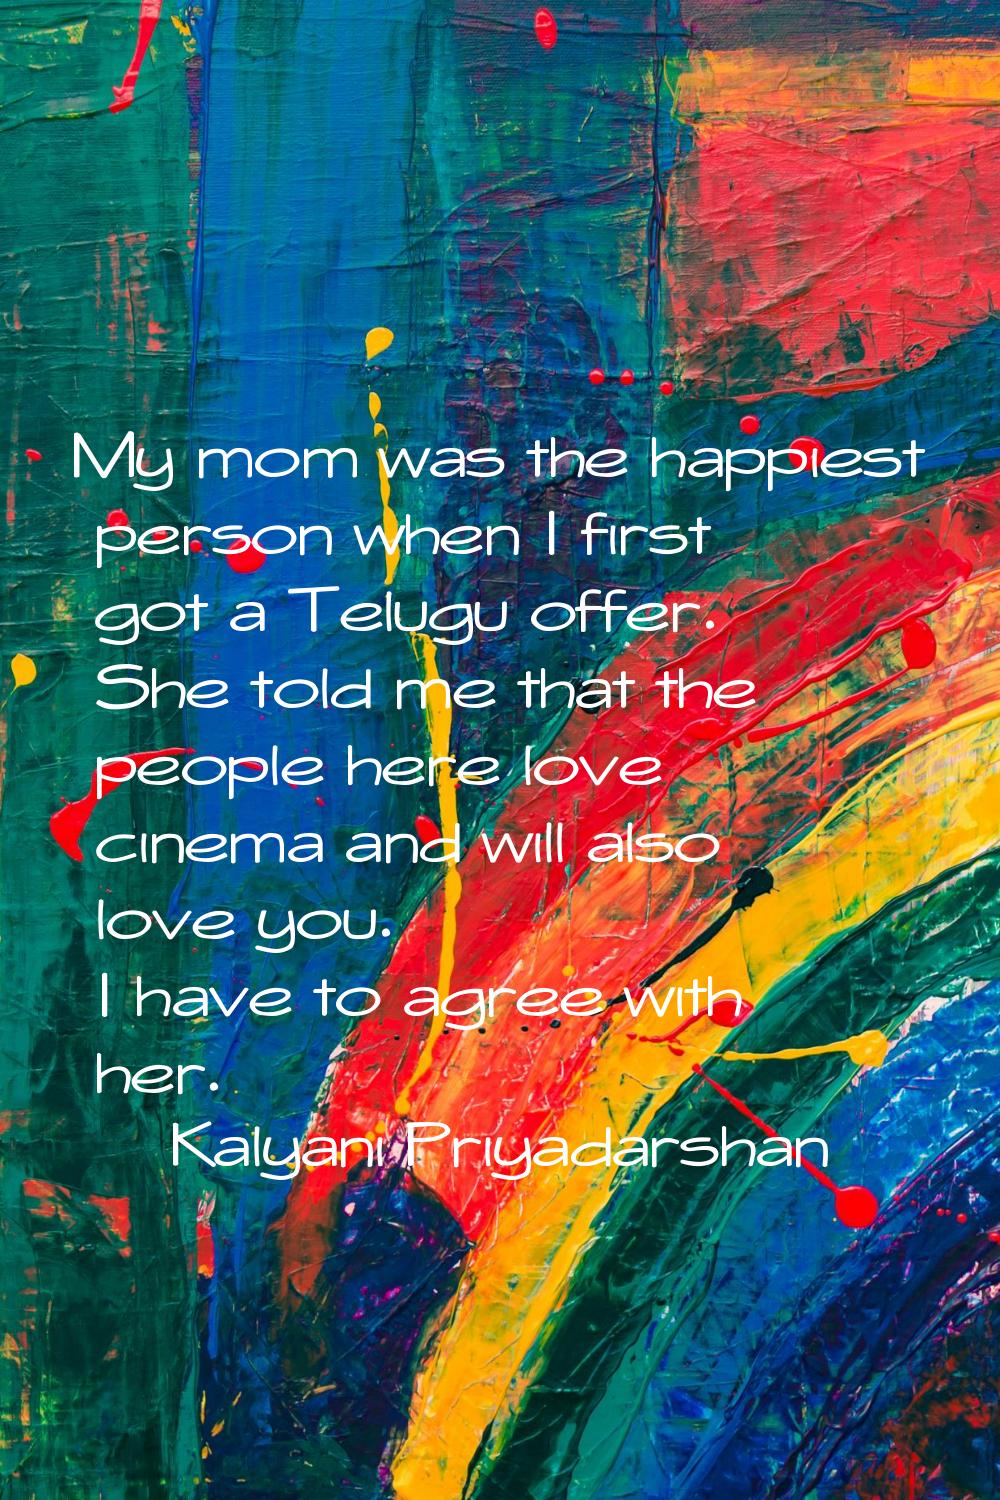 My mom was the happiest person when I first got a Telugu offer. She told me that the people here lo